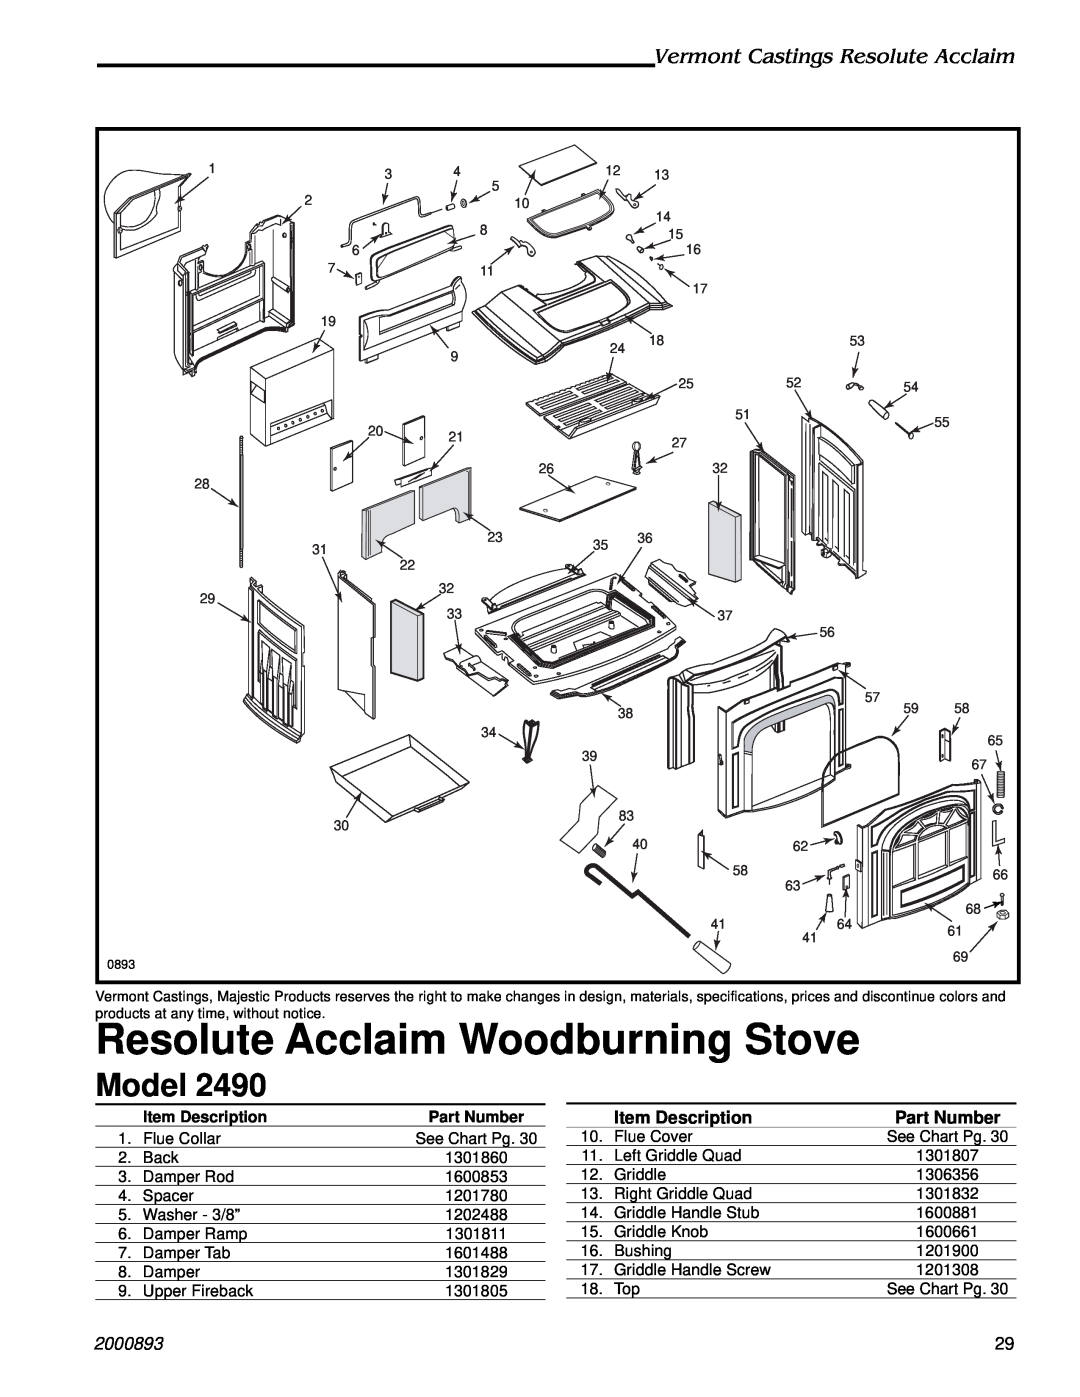 Majestic Appliances 2490 Model, Resolute Acclaim Woodburning Stove, Vermont Castings Resolute Acclaim, 2000893 